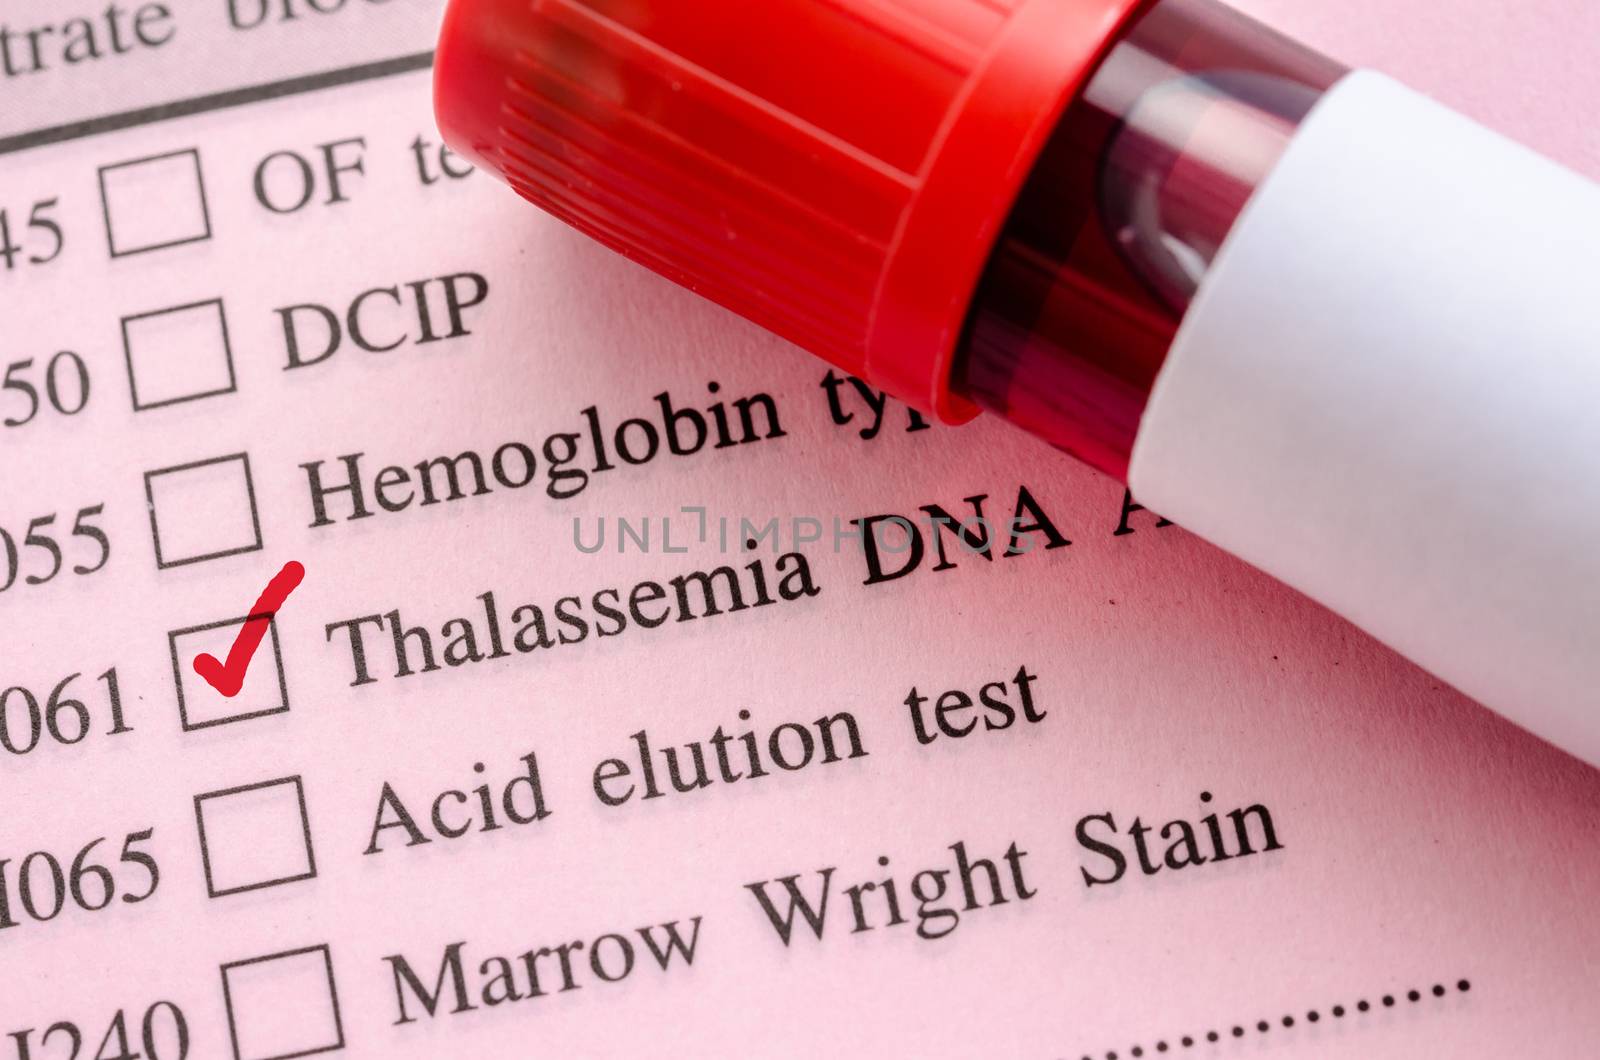 Sample blood in blood tube for Thalassemia DNA test on request form in laboratory.